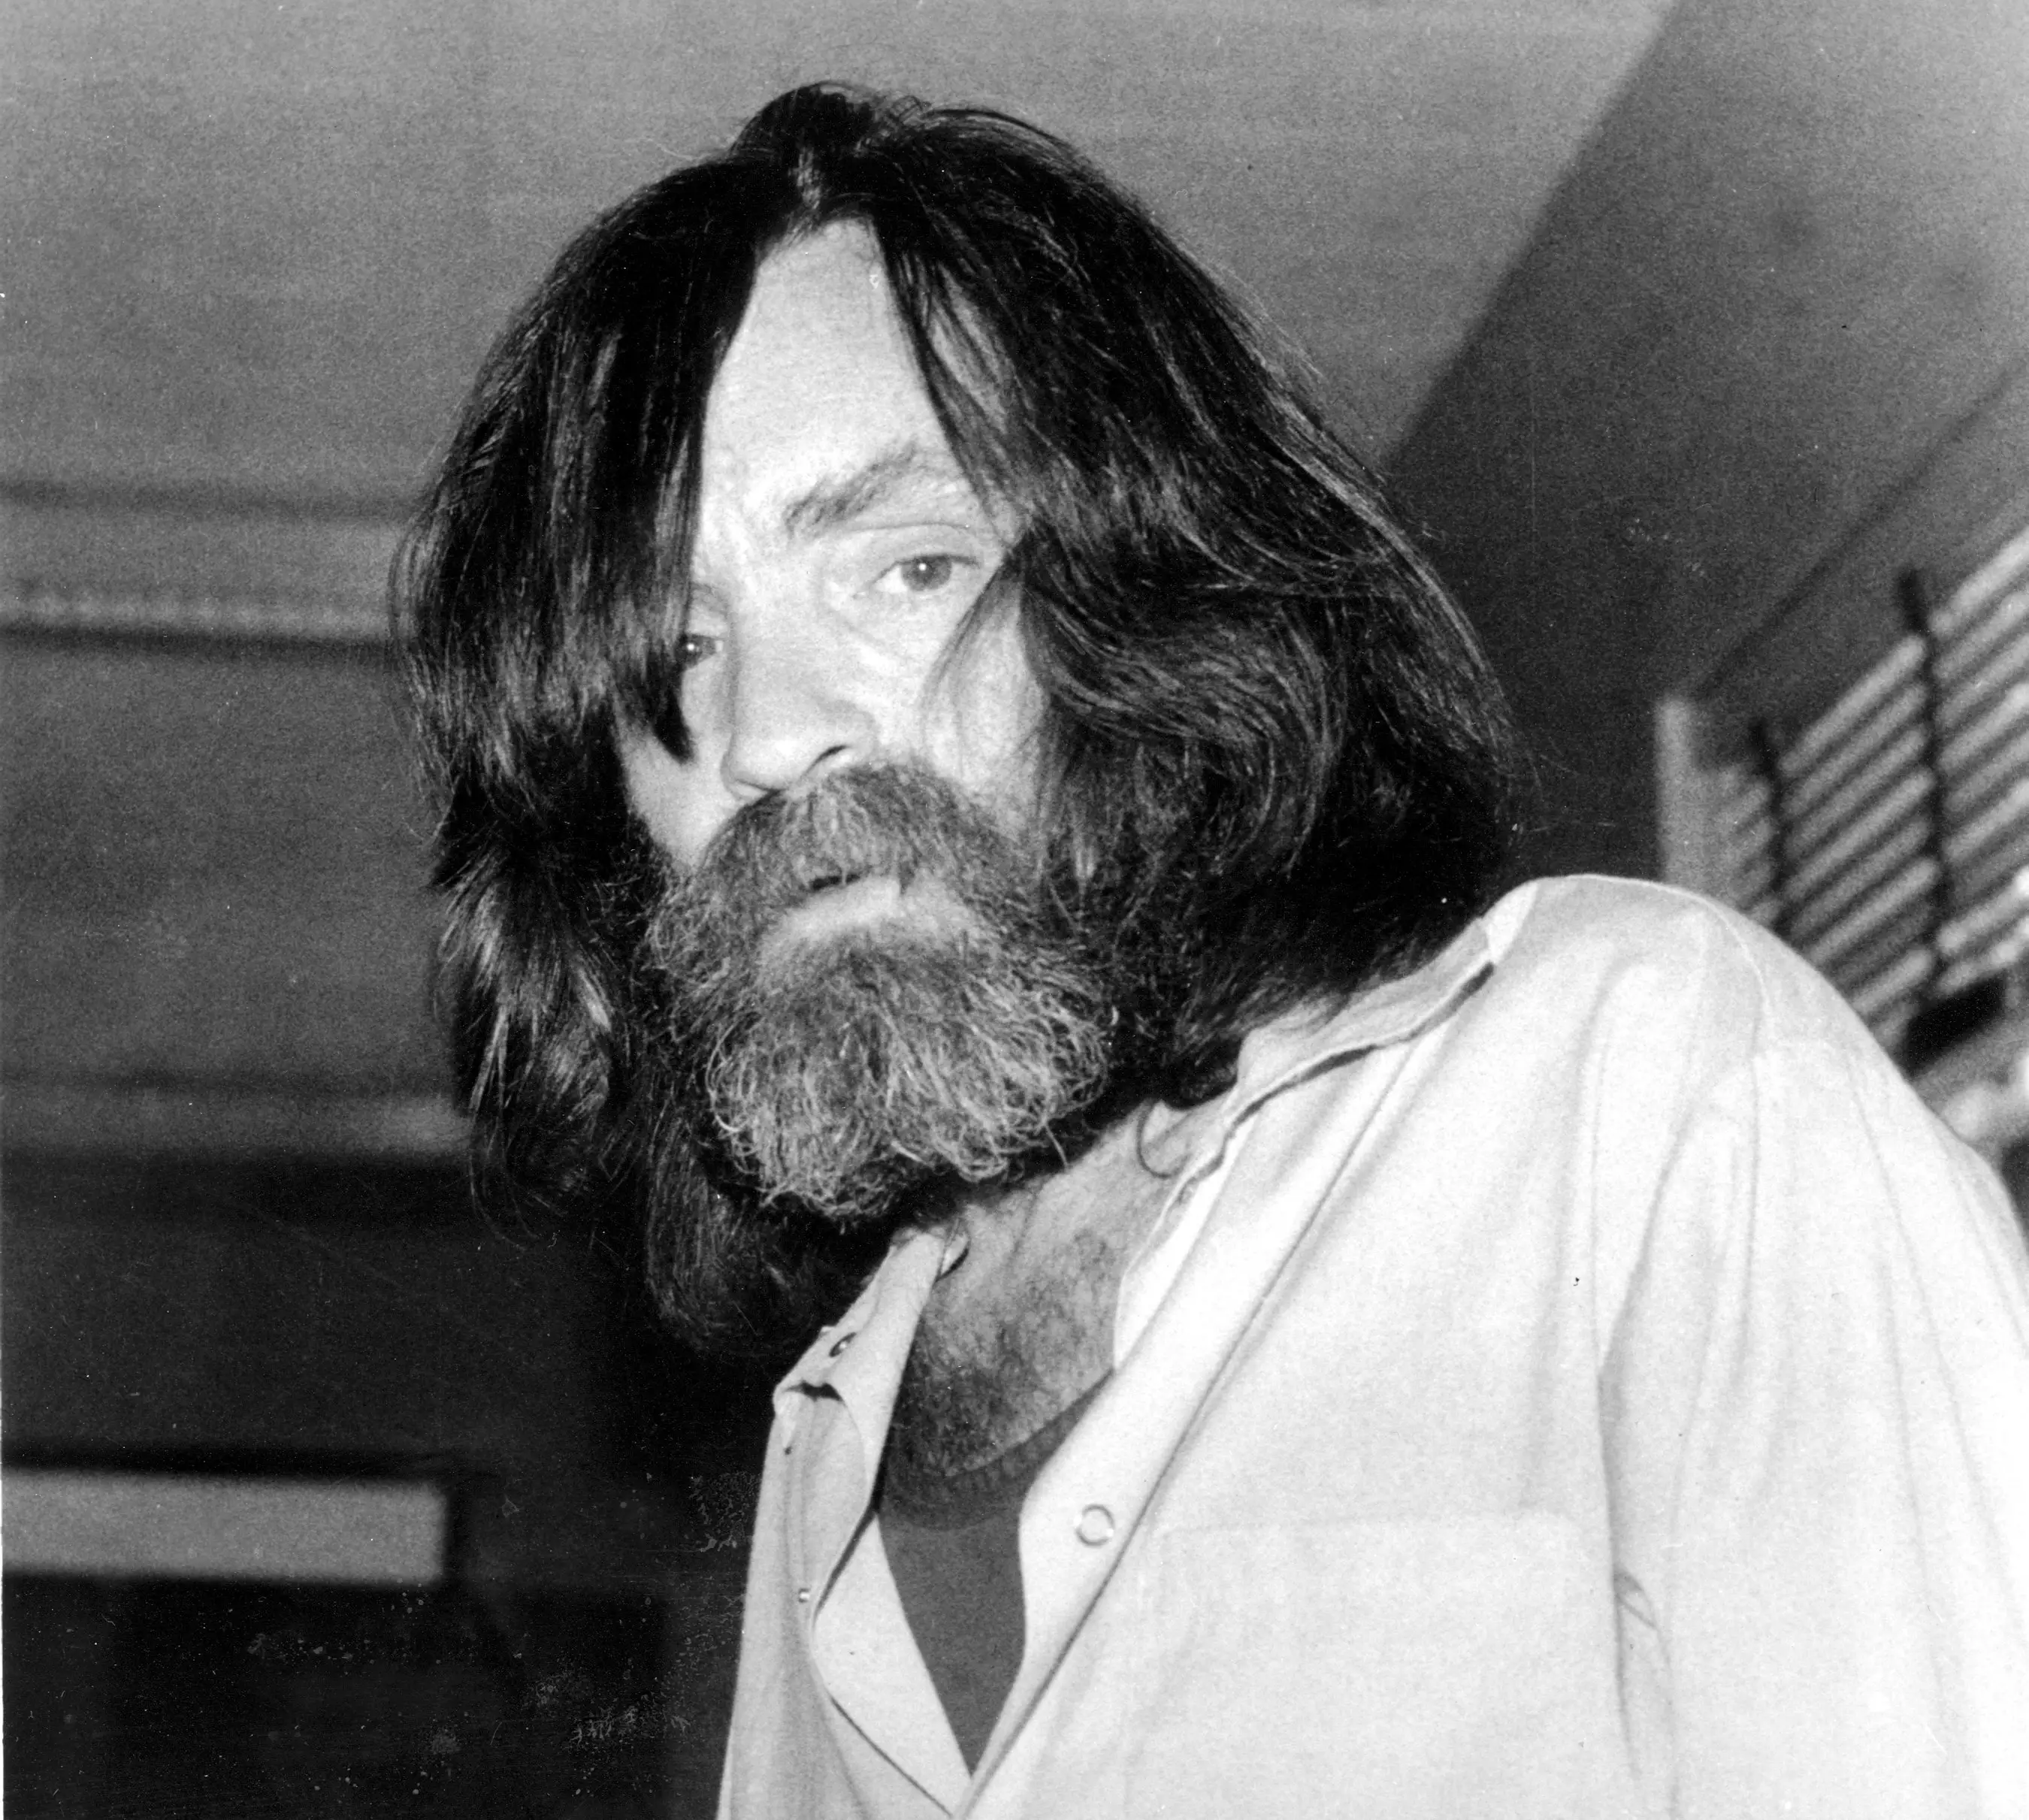 Charles Manson's long hair and beard make him instantly recognisable (